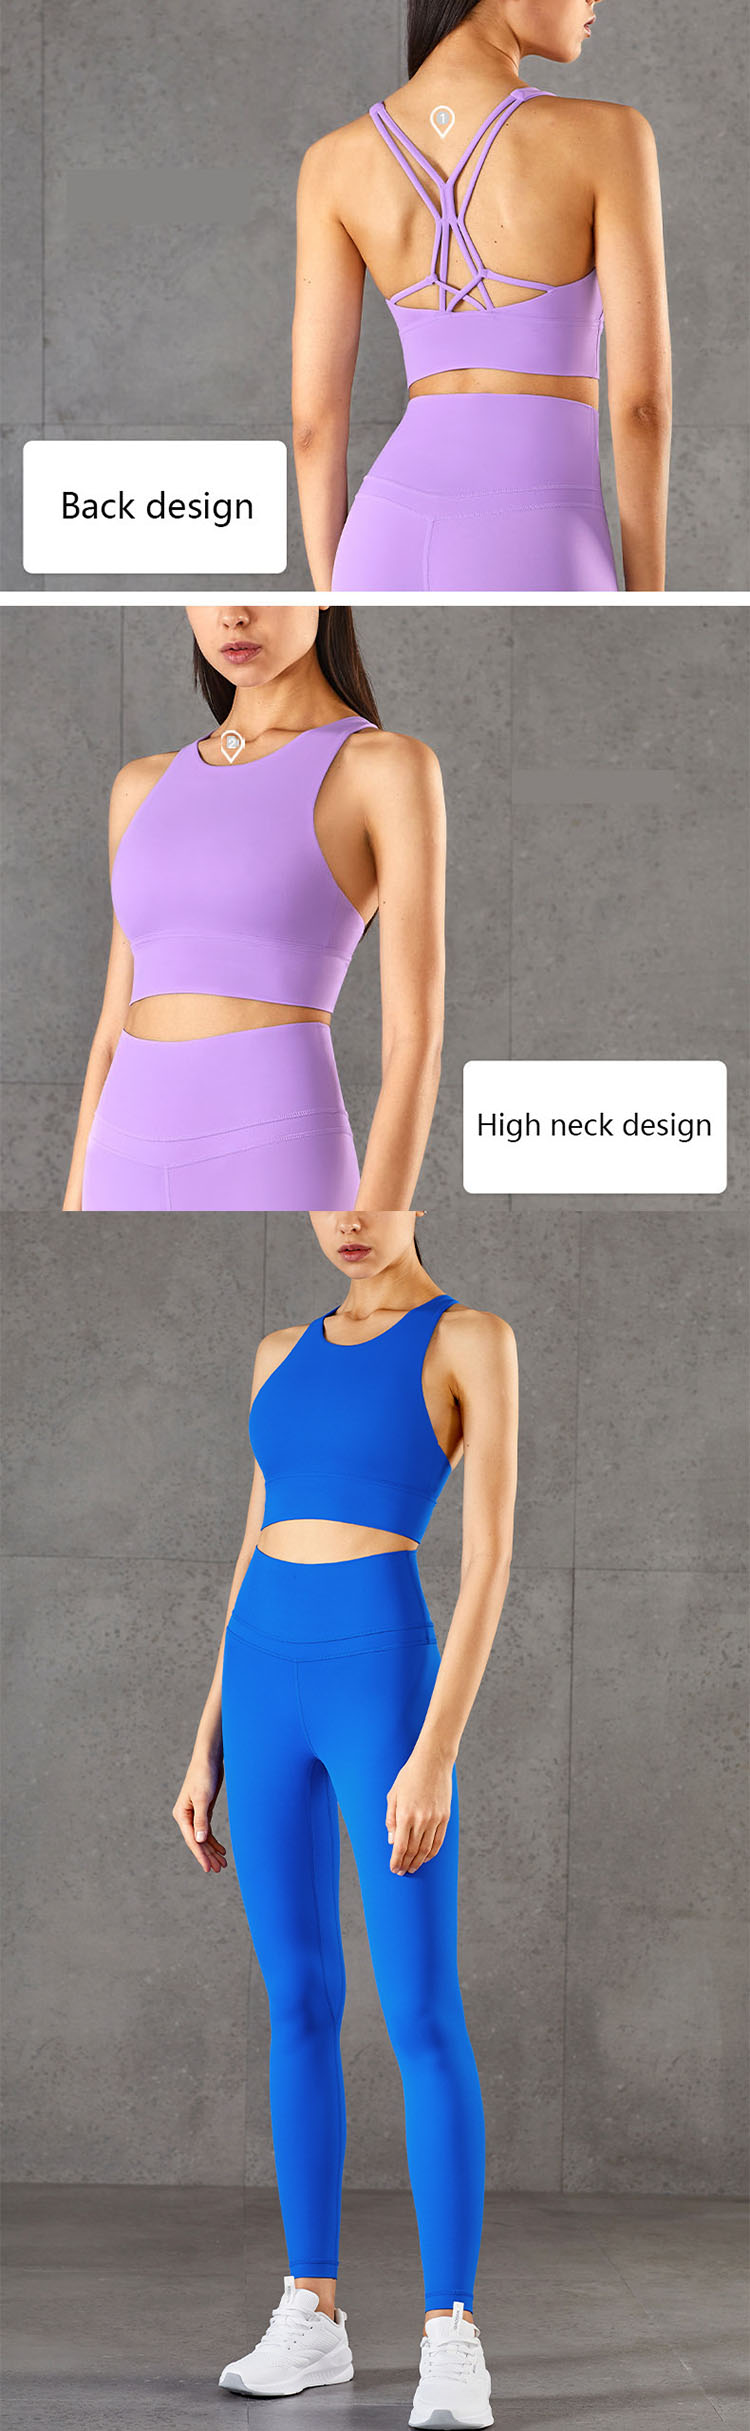 The Wired sports bra is mainly designed with delicate stitch design and neckline yarn